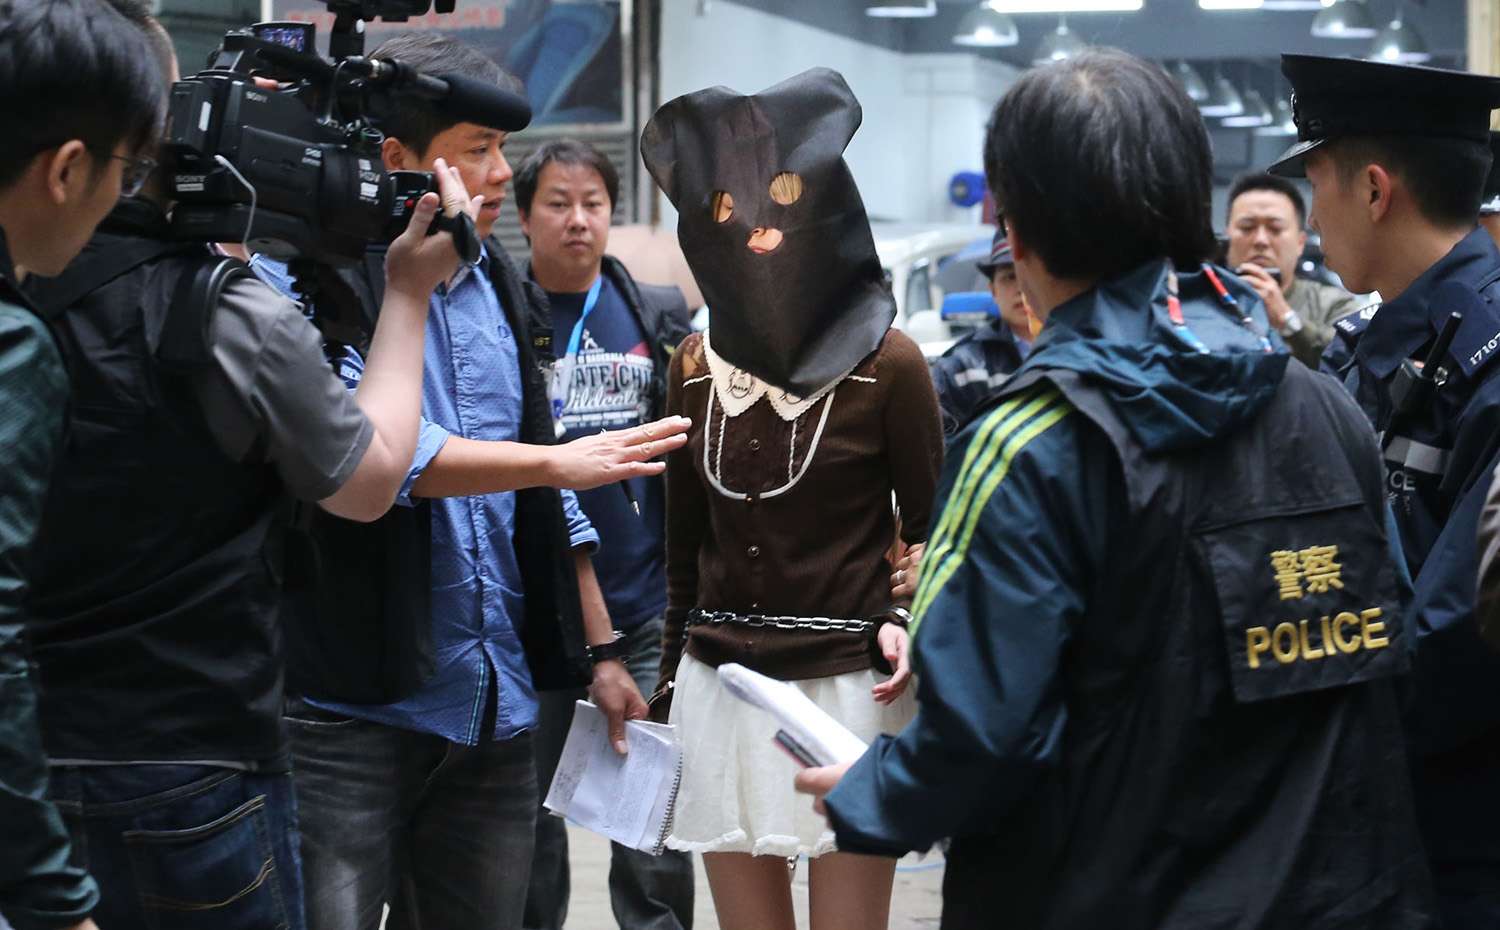 The suspect was hooded and handcuffed when she got out of an unmarked police car and was escorted into the building at 3.10pm. Photo: Felix Wong